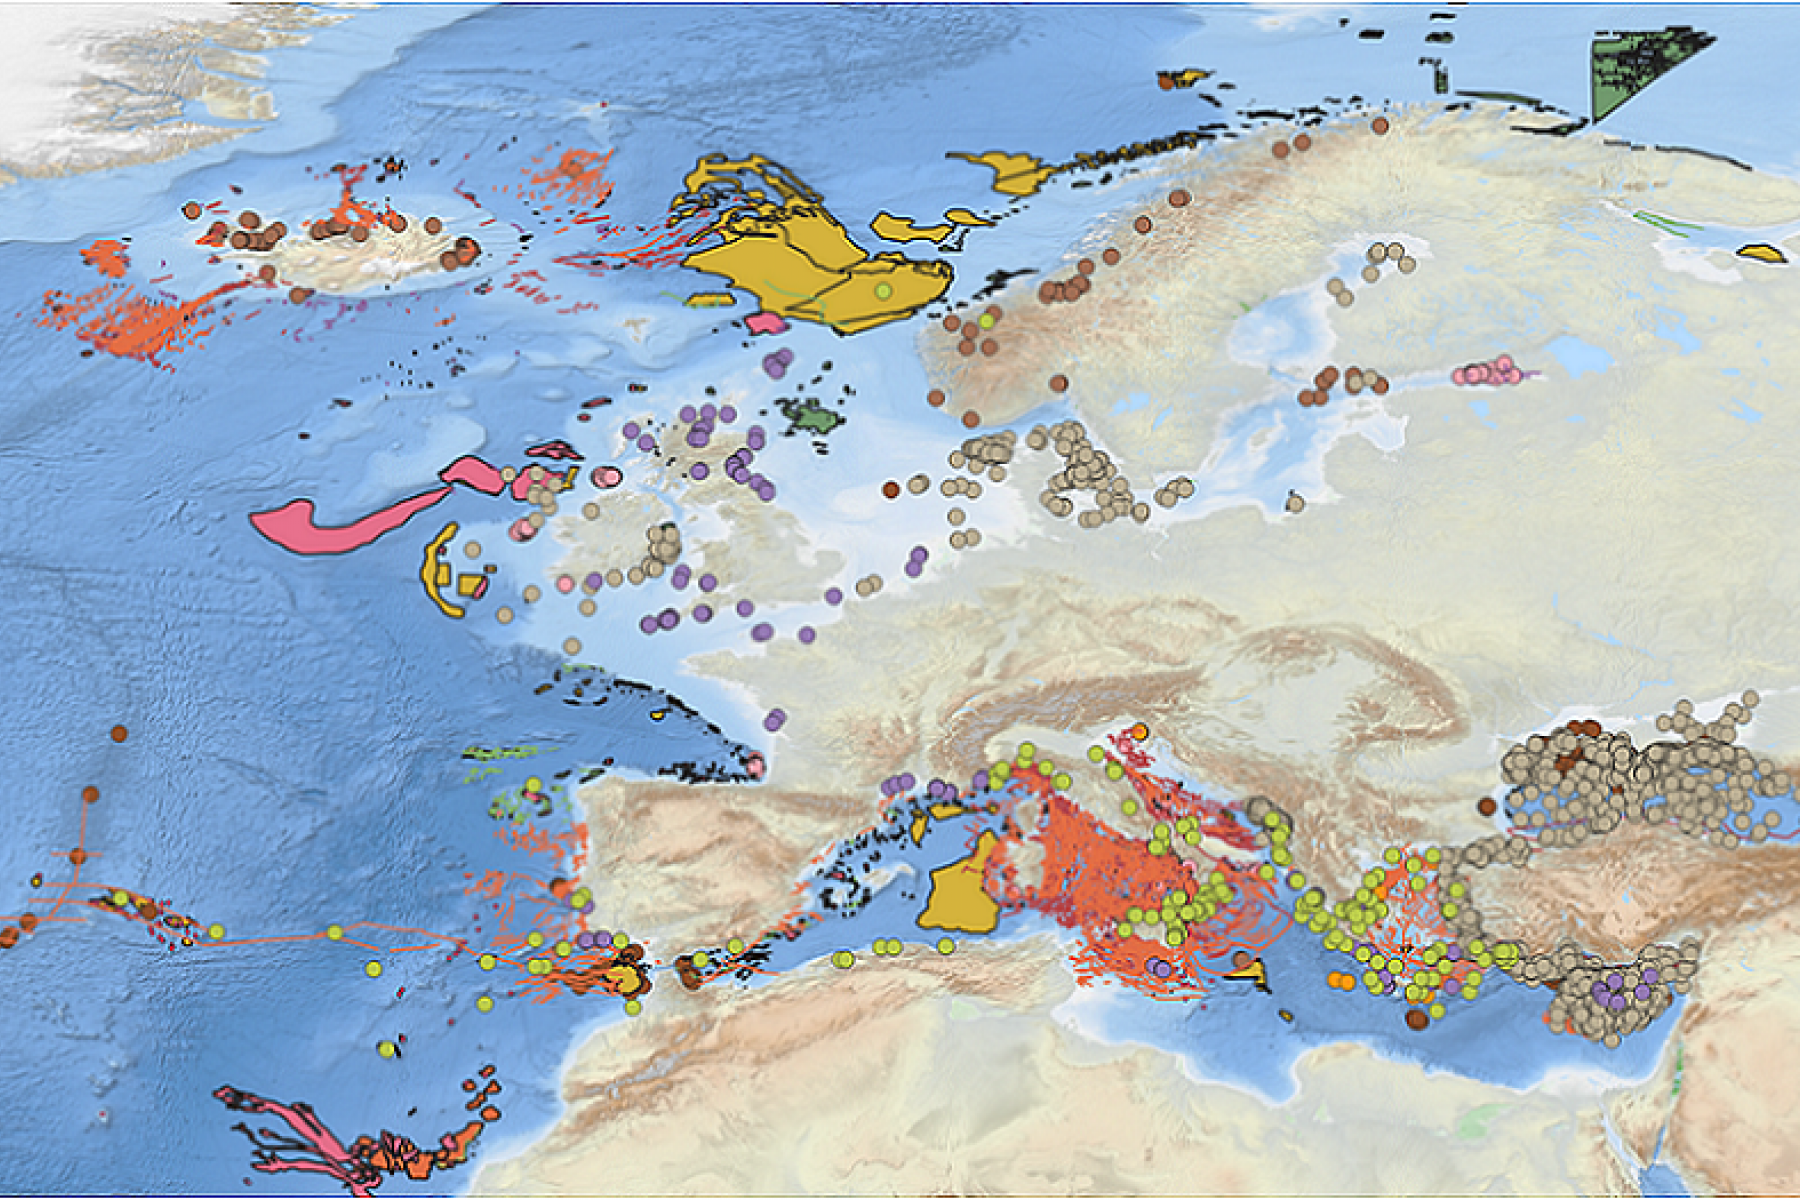 Updated Geological events layers - DTM from EMODnet Bathymetry / data from EMODnet Geology Work Package 6 Geological events and probabilities. ©EMODnet